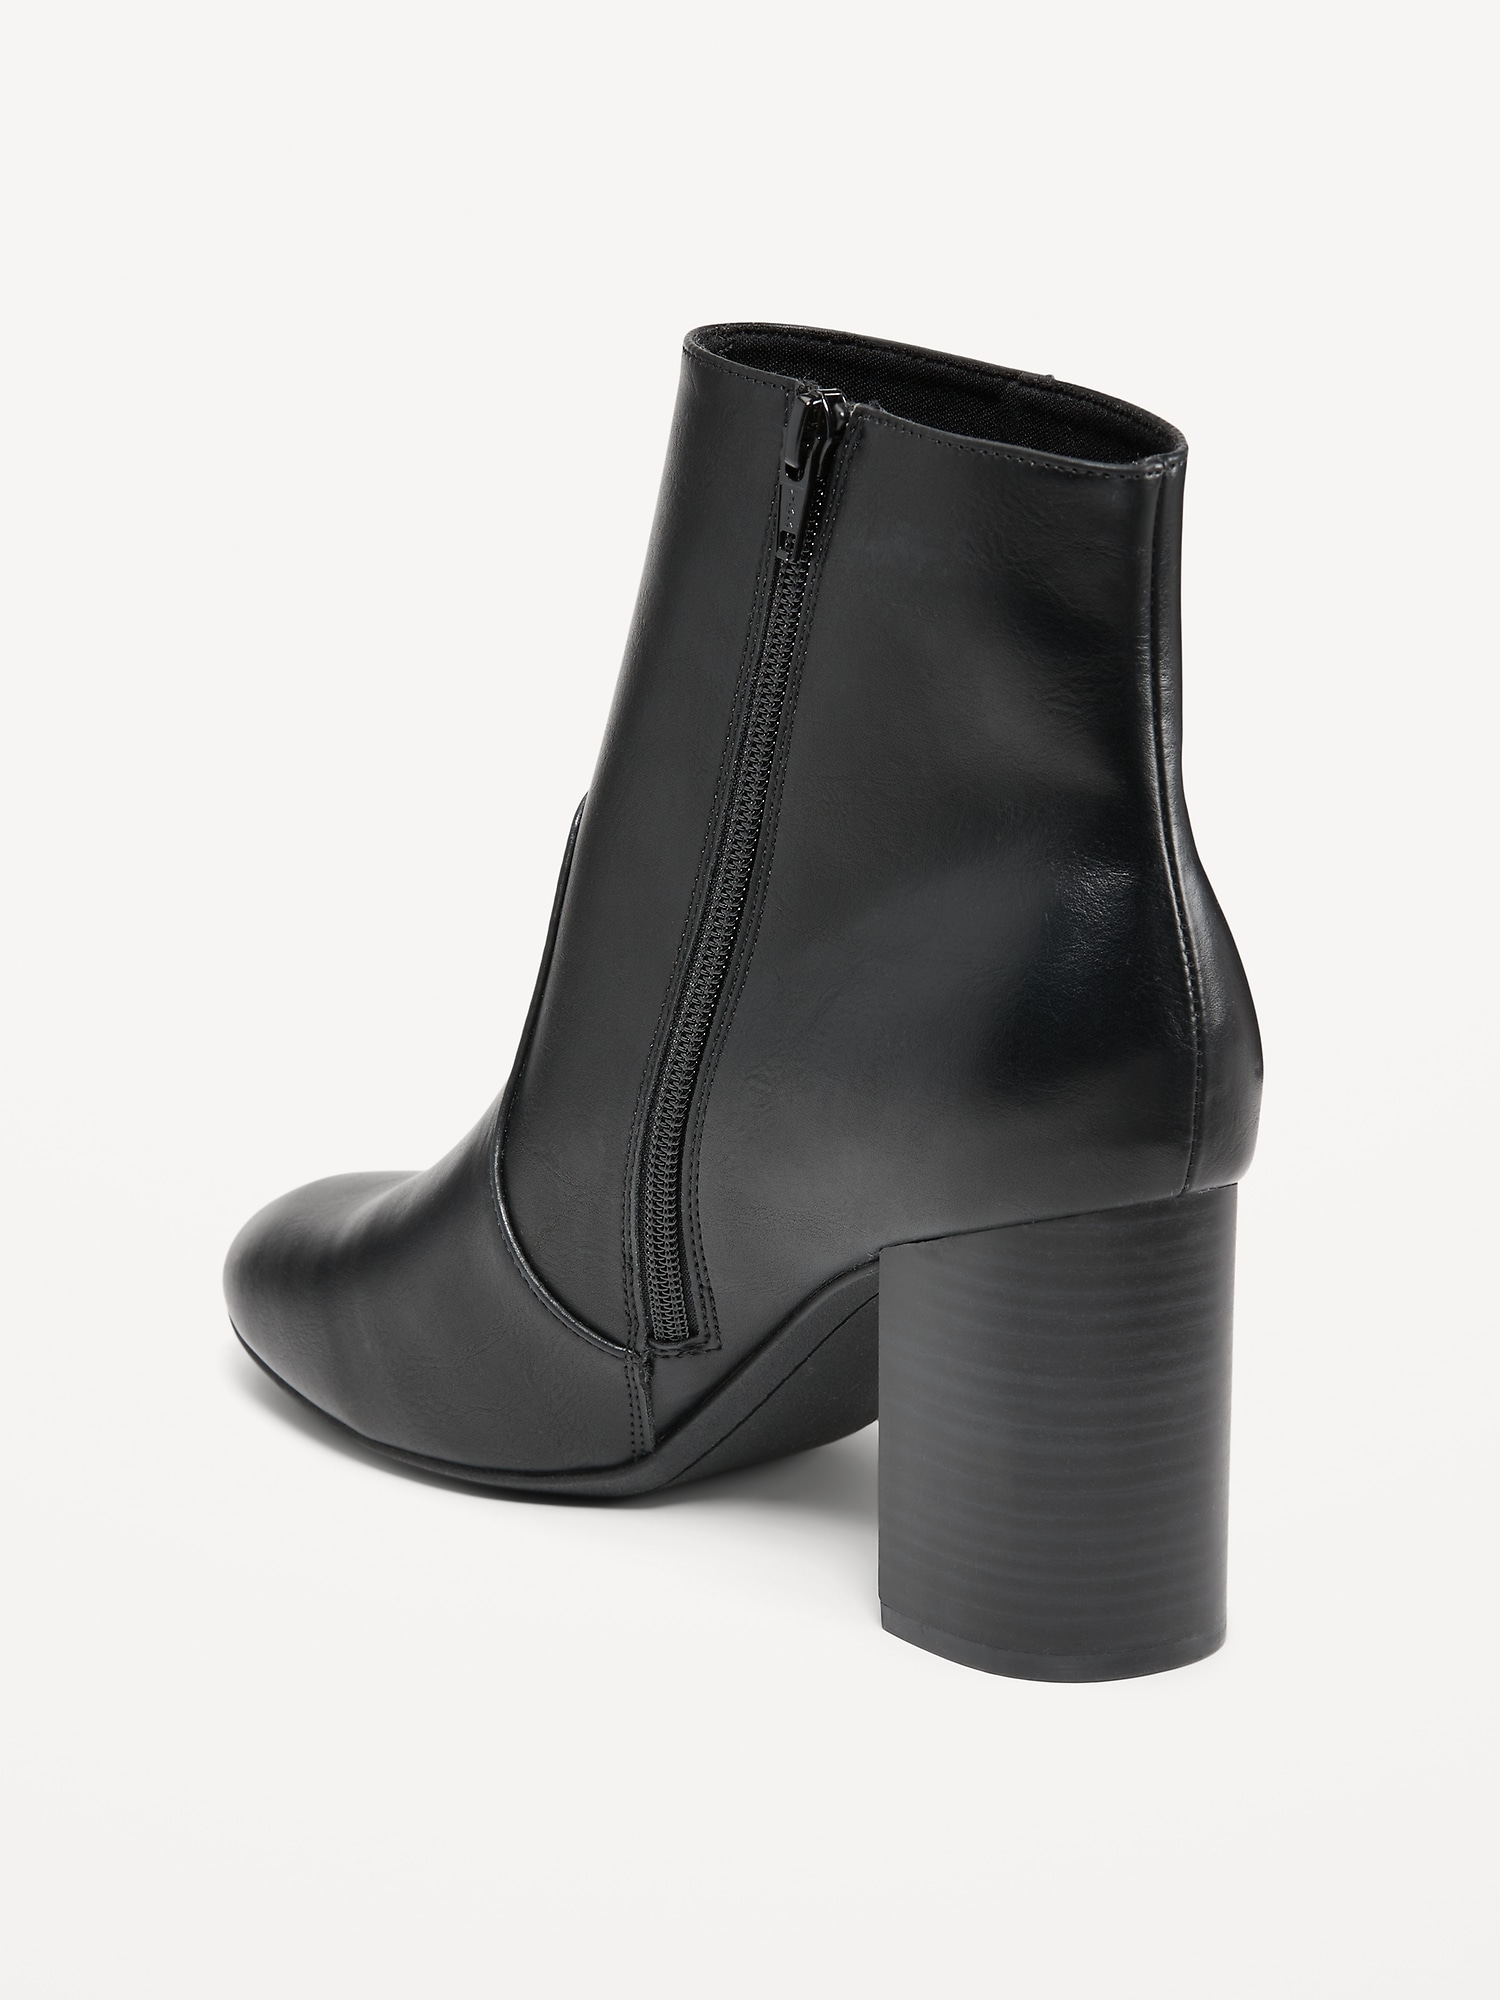 Faux Leather Block Heel Ankle Boots for Women | Old Navy